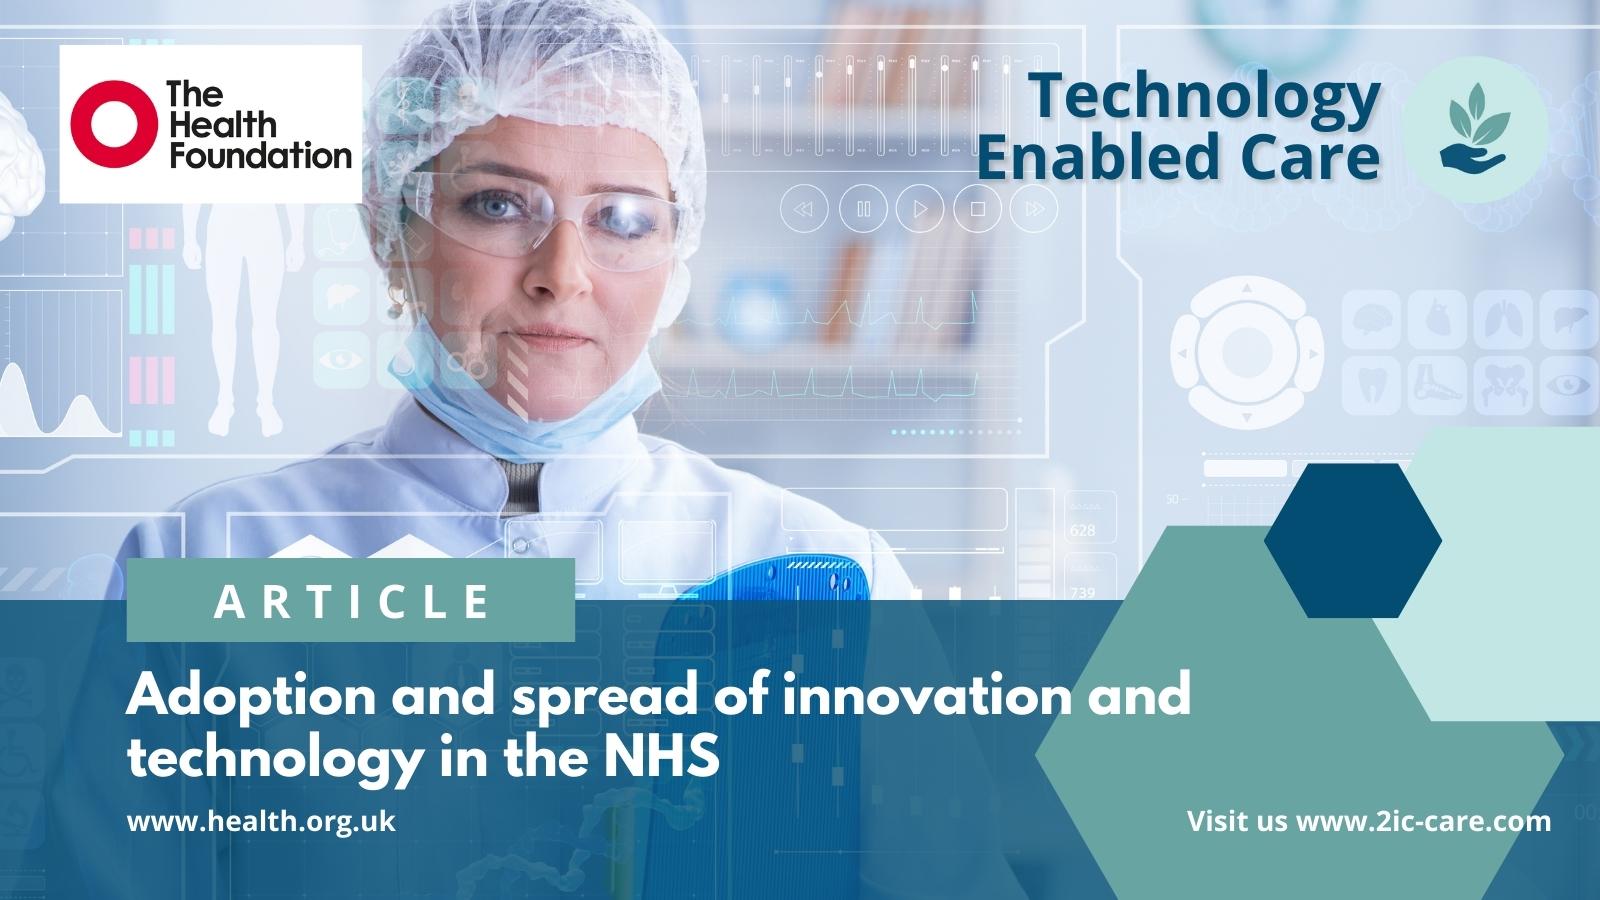 COVID-19 has turbo-charged the use of technology across the NHS